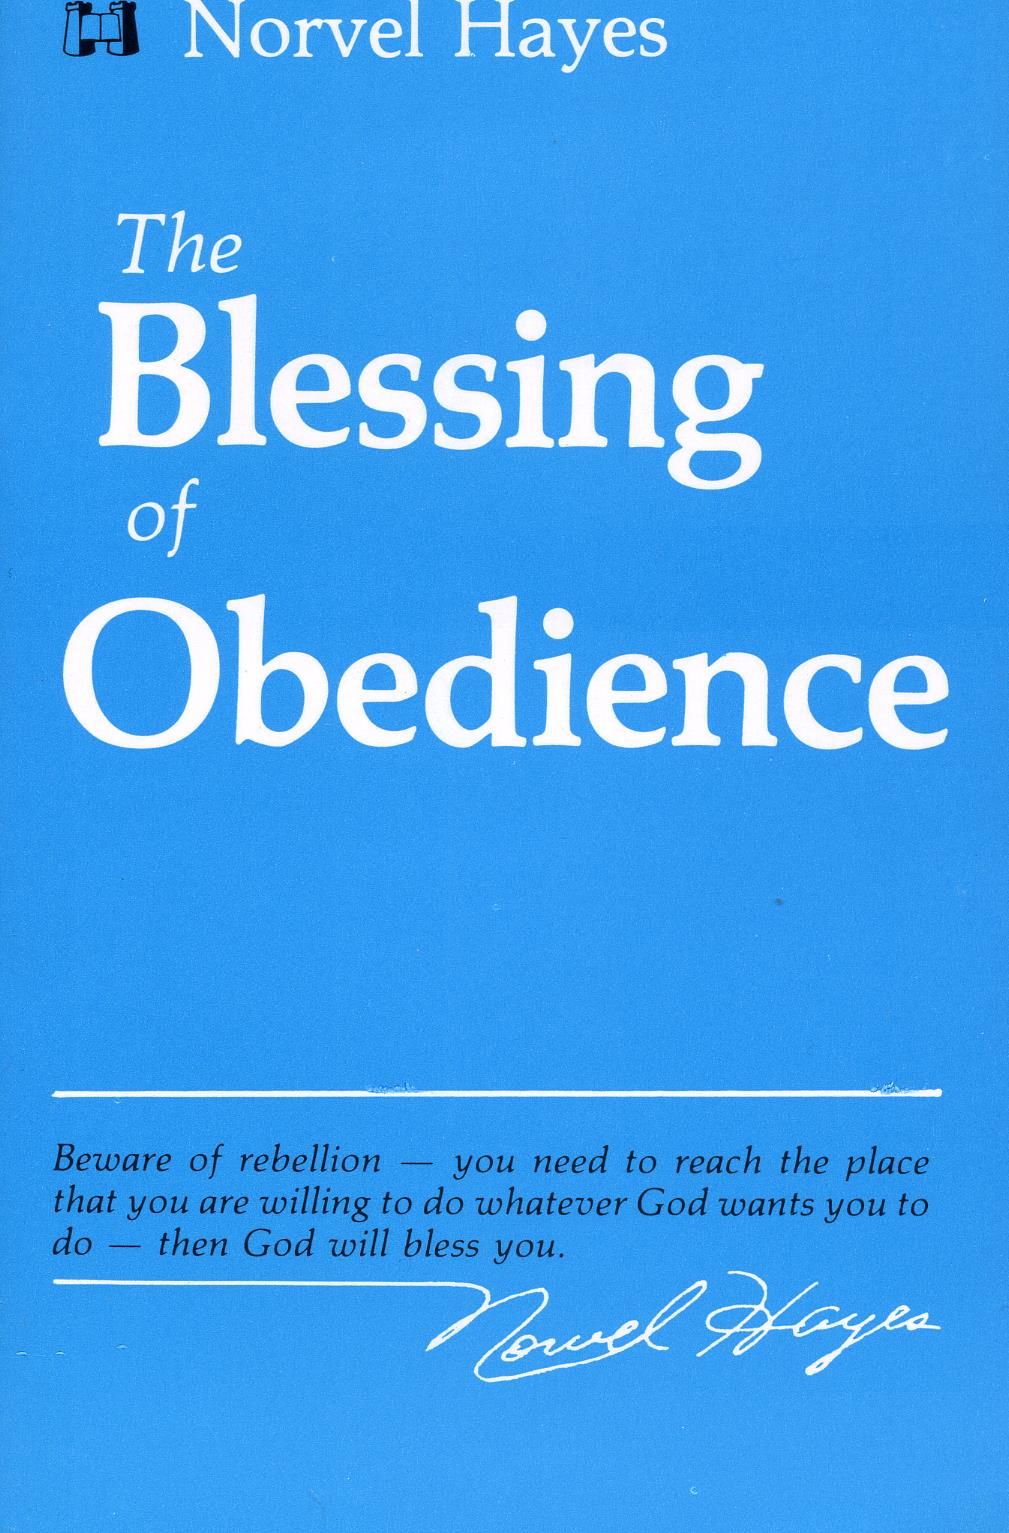 Englische Bücher - N. Hayes: The Blessing of Obedience